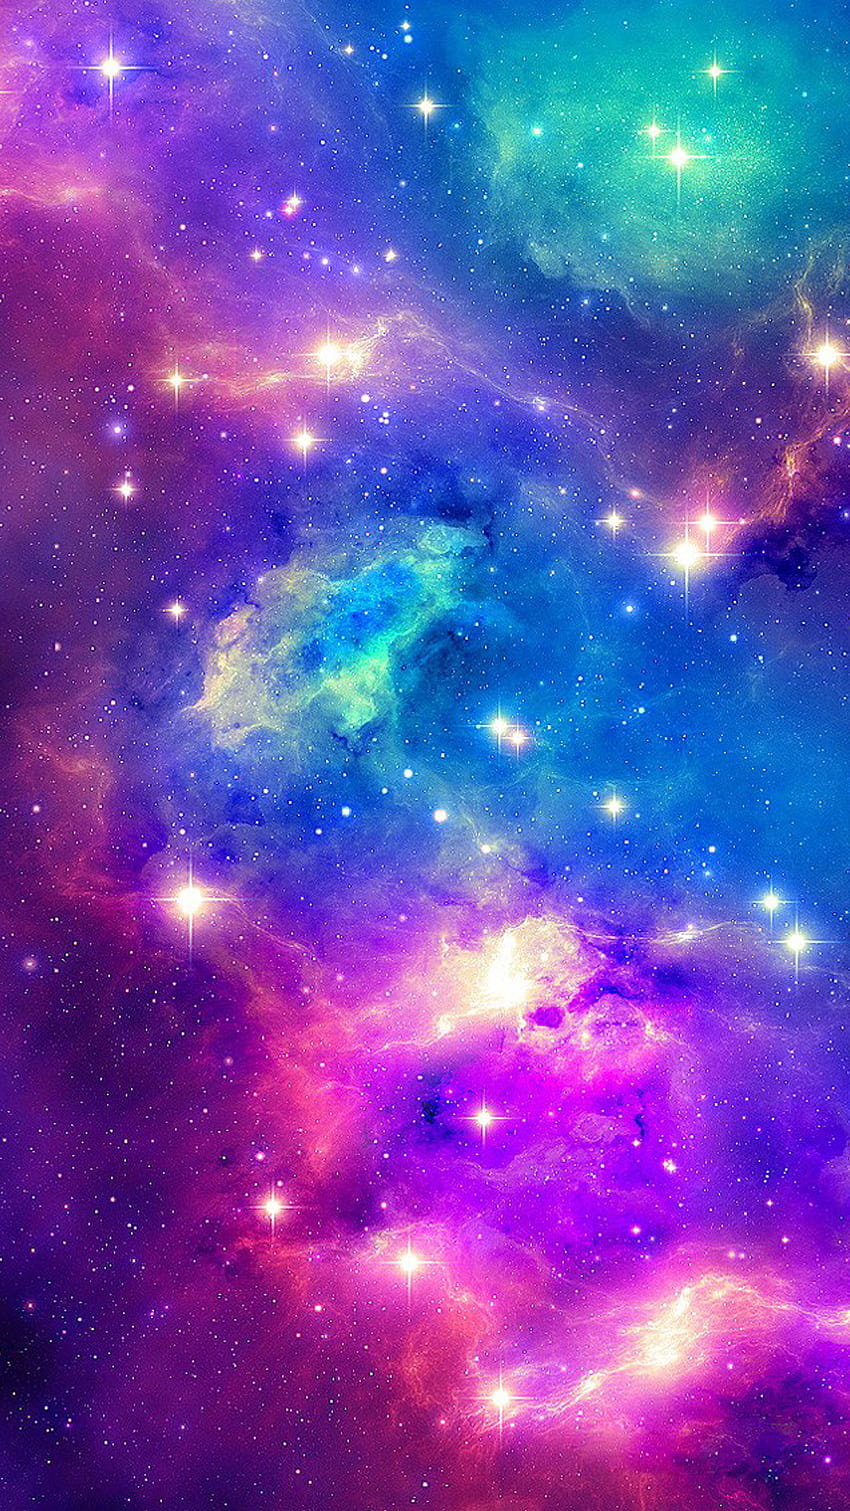 Bright Blue Stars During Nighttime HD Galaxy Wallpapers  HD Wallpapers   ID 49708